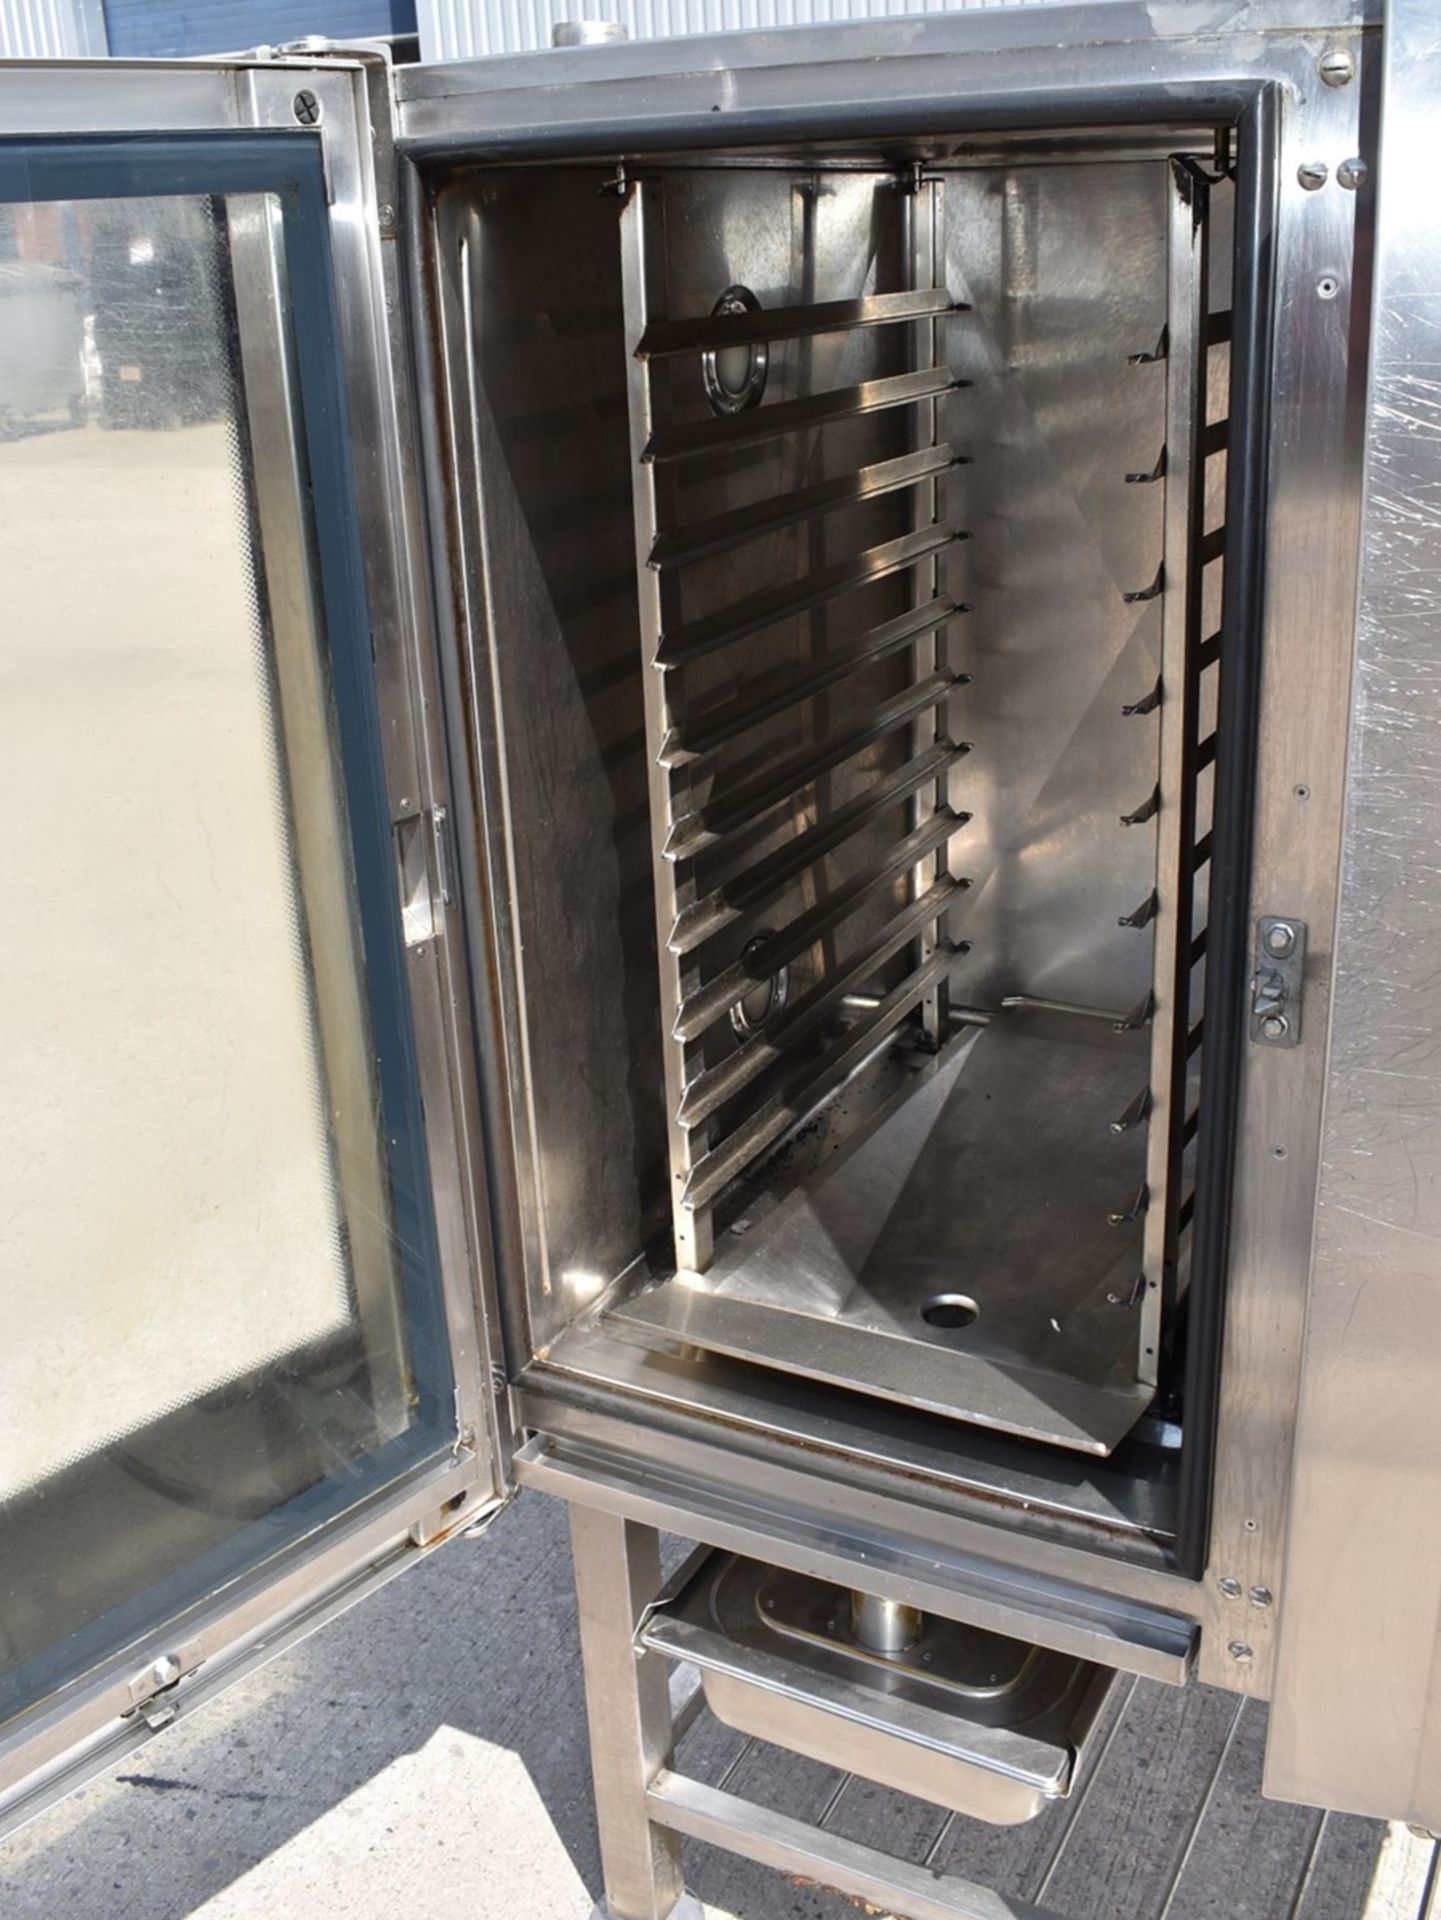 1 x Houno CPE 1.06 Electric Combi Oven - 3 Phase Combi Oven With Various Pre-Set Cooking Options - Image 4 of 14